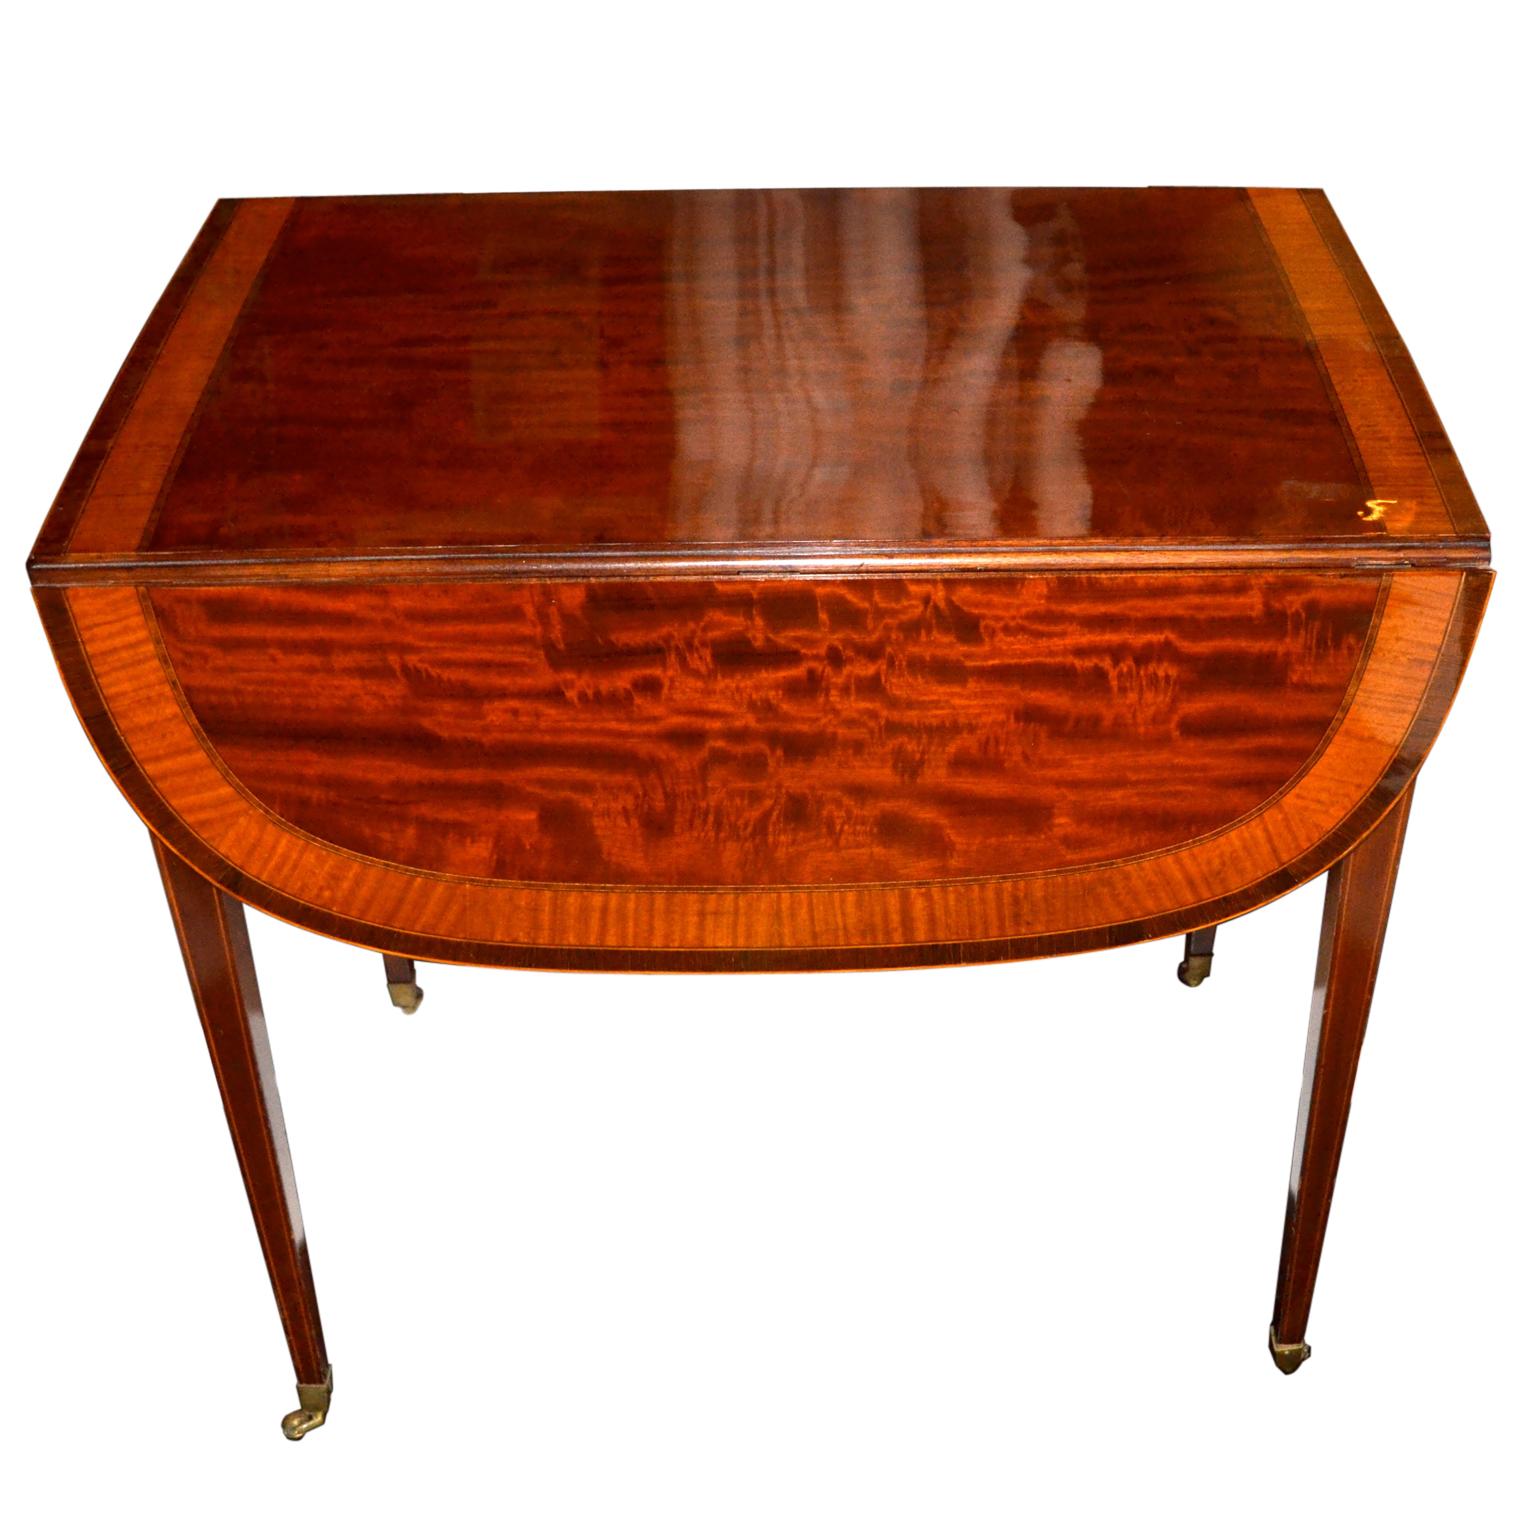 Hand-Carved 19th Century Satinwood English Pembroke Table For Sale